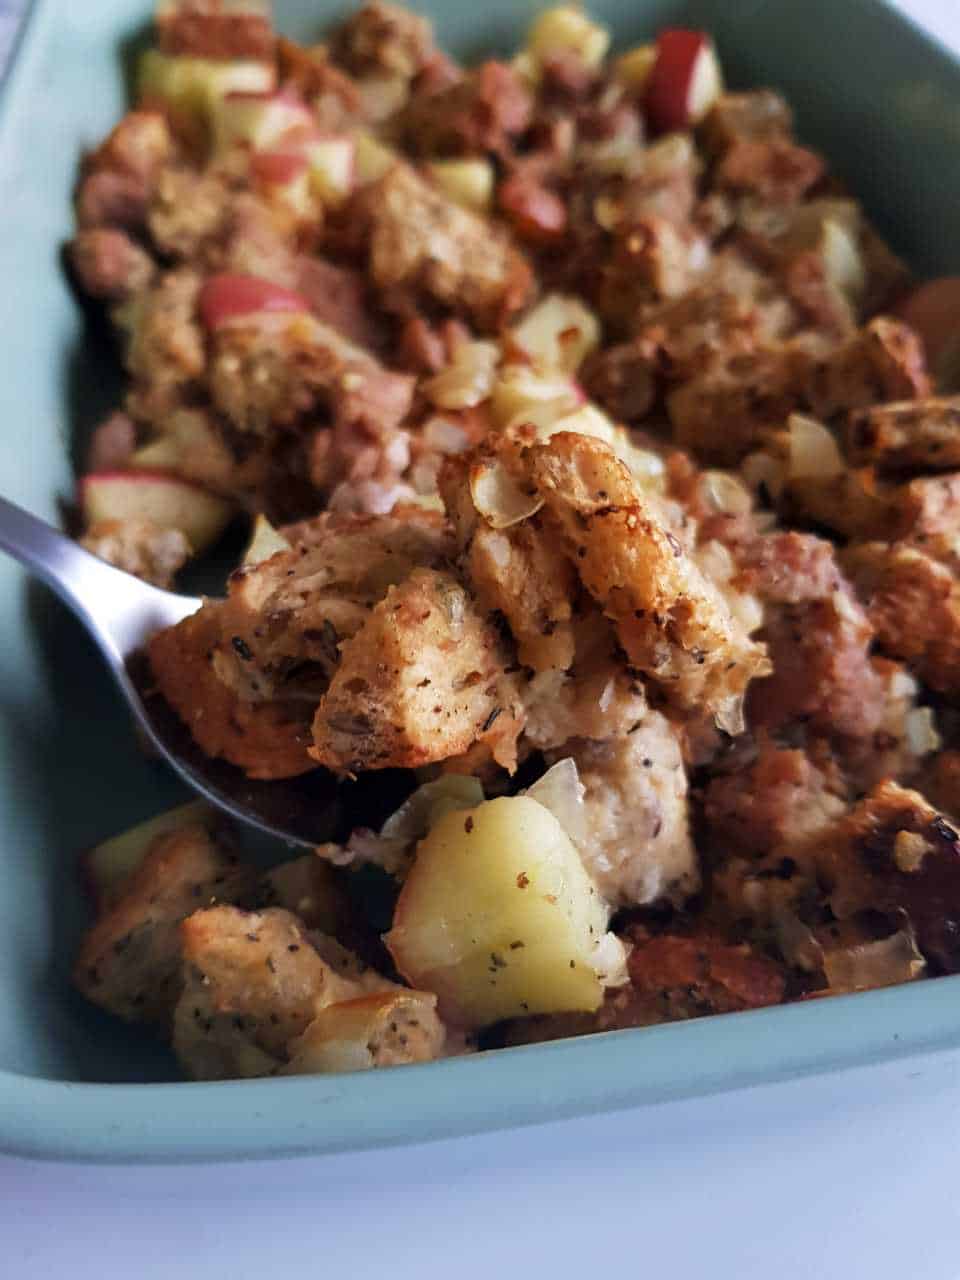 Stuffing with sausage and apples in a green oven dish.